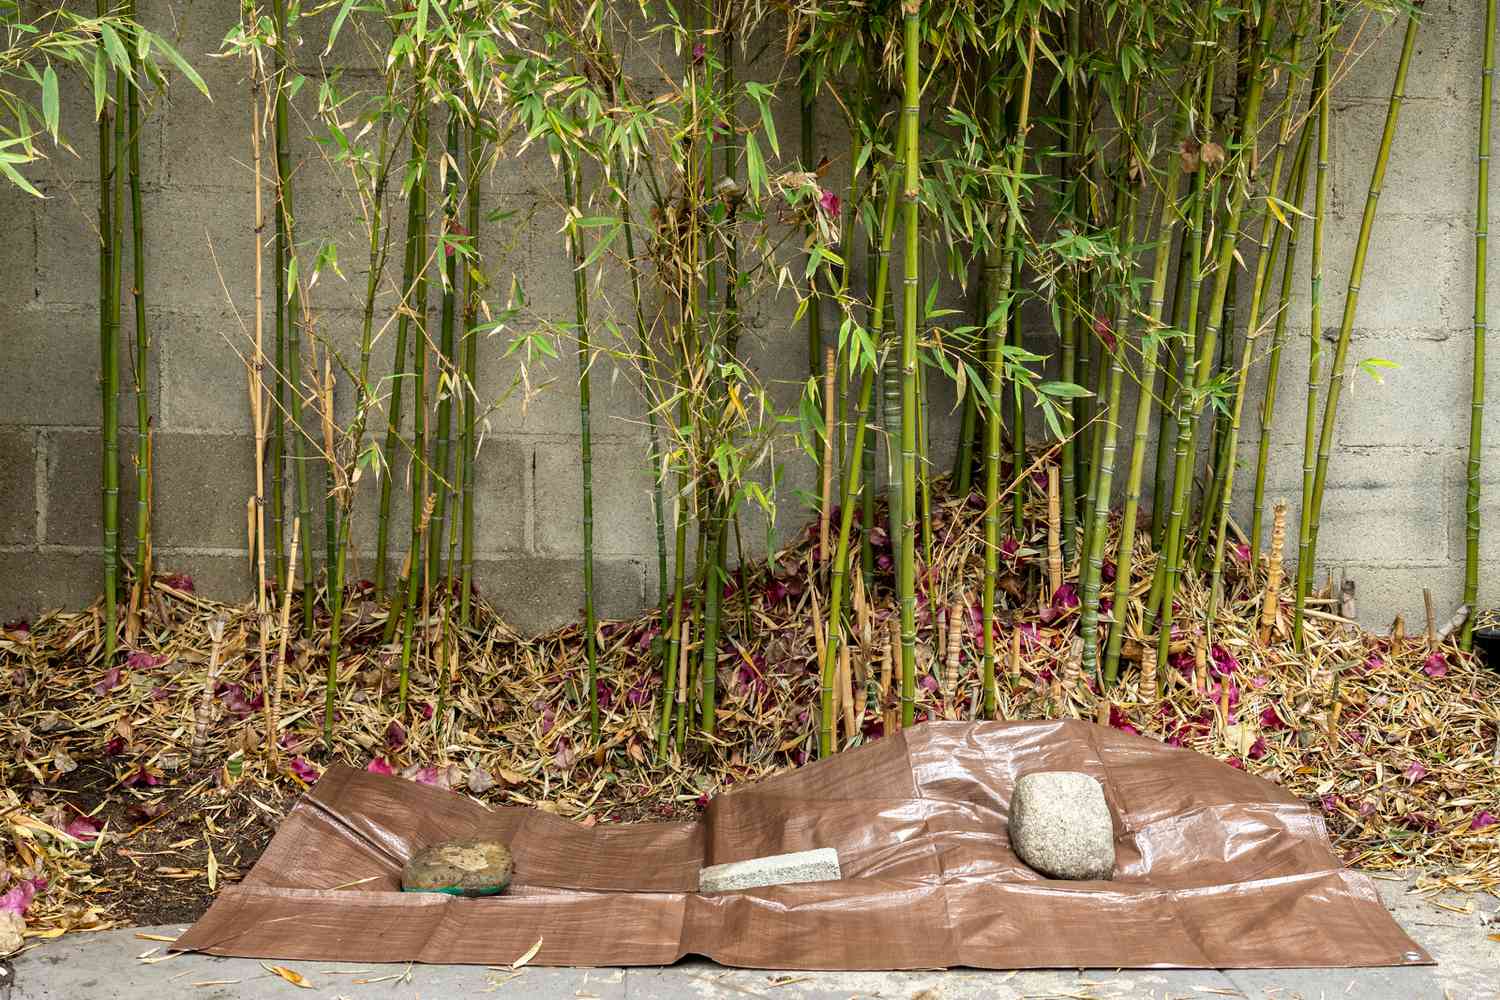 Tarp laid out in front of bamboo plants in yard